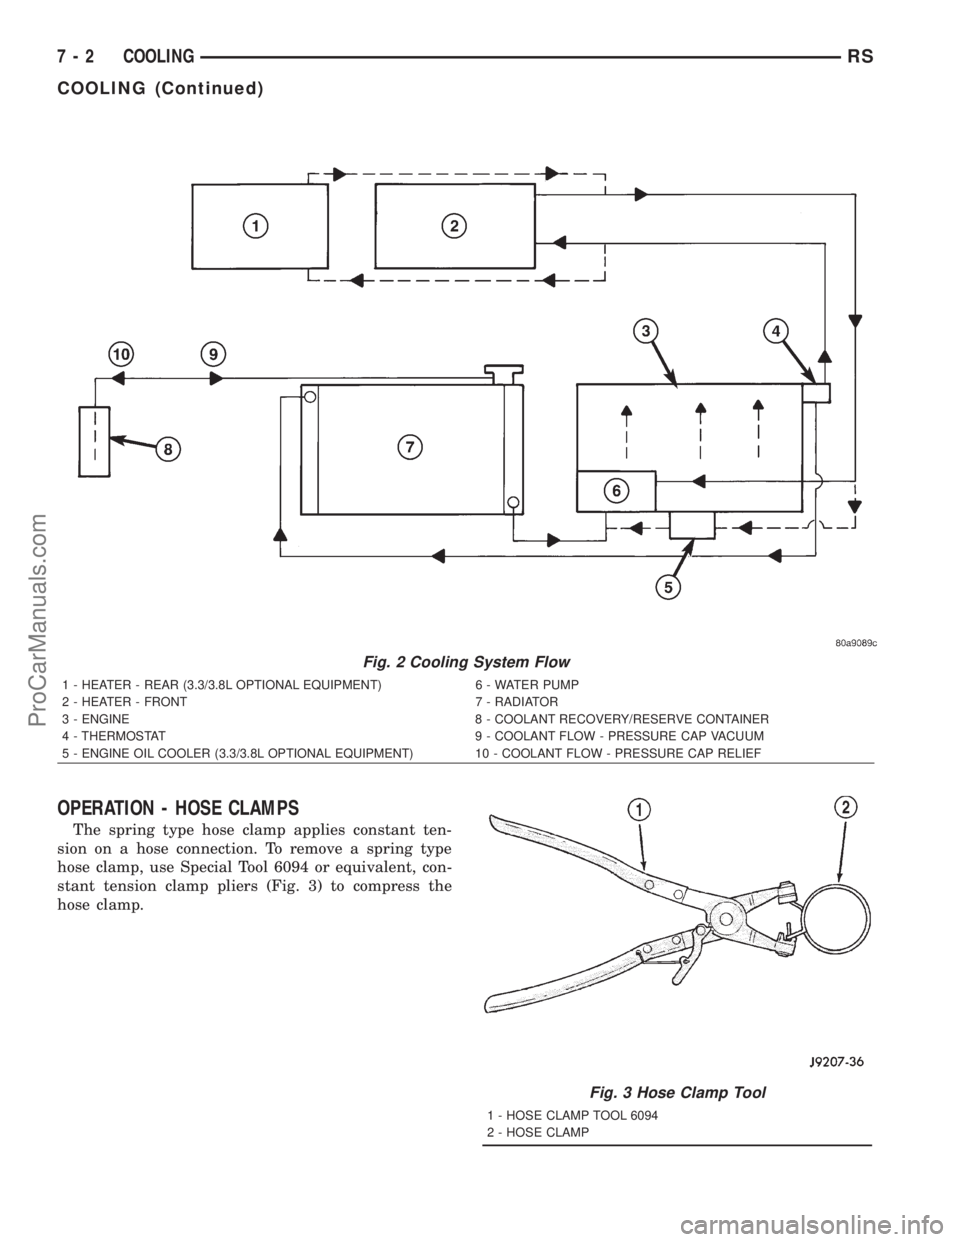 DODGE TOWN AND COUNTRY 2001  Service Manual OPERATION - HOSE CLAMPS
The spring type hose clamp applies constant ten-
sion on a hose connection. To remove a spring type
hose clamp, use Special Tool 6094 or equivalent, con-
stant tension clamp pl